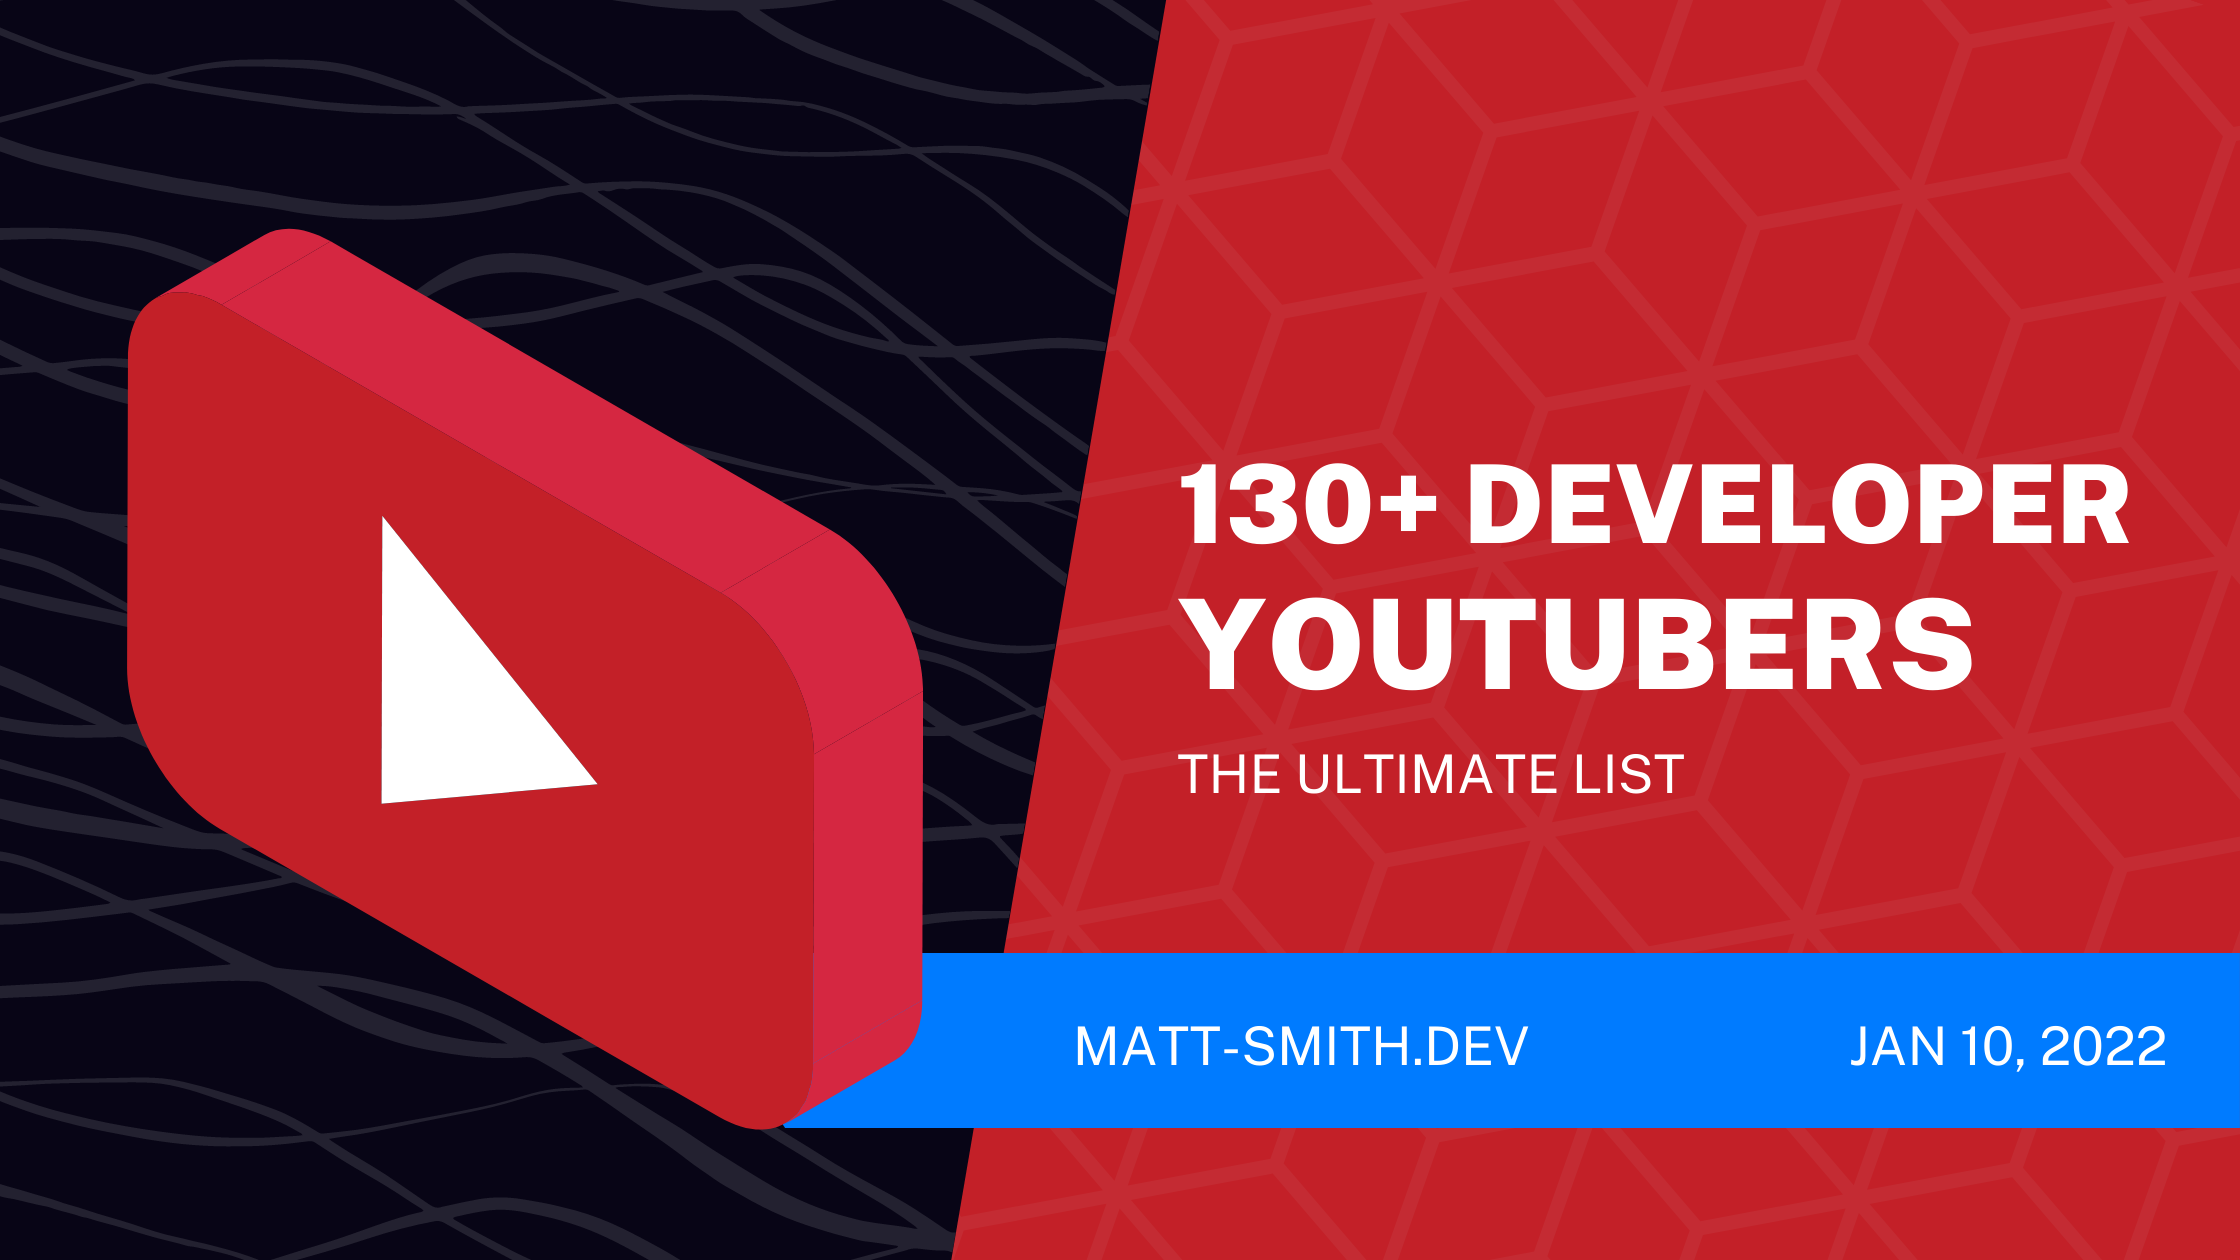 The Ultimate List of Developer Youtube Channels